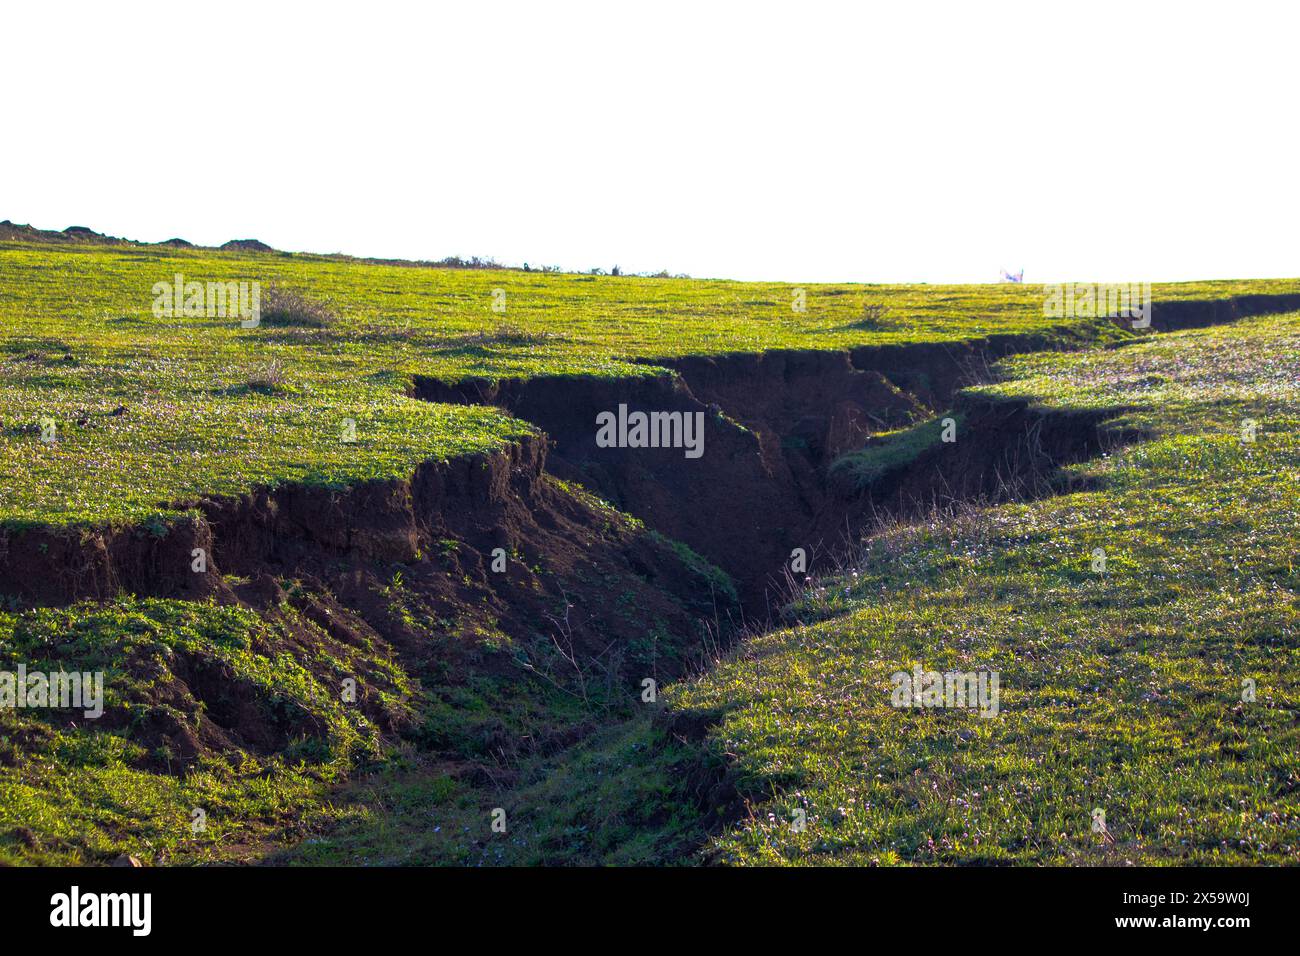 Fault line. The land in Istanbul was divided into two. Earthquake. Fault line visible from the surface. Ground motion idea concept. Horizontal photo. Stock Photo